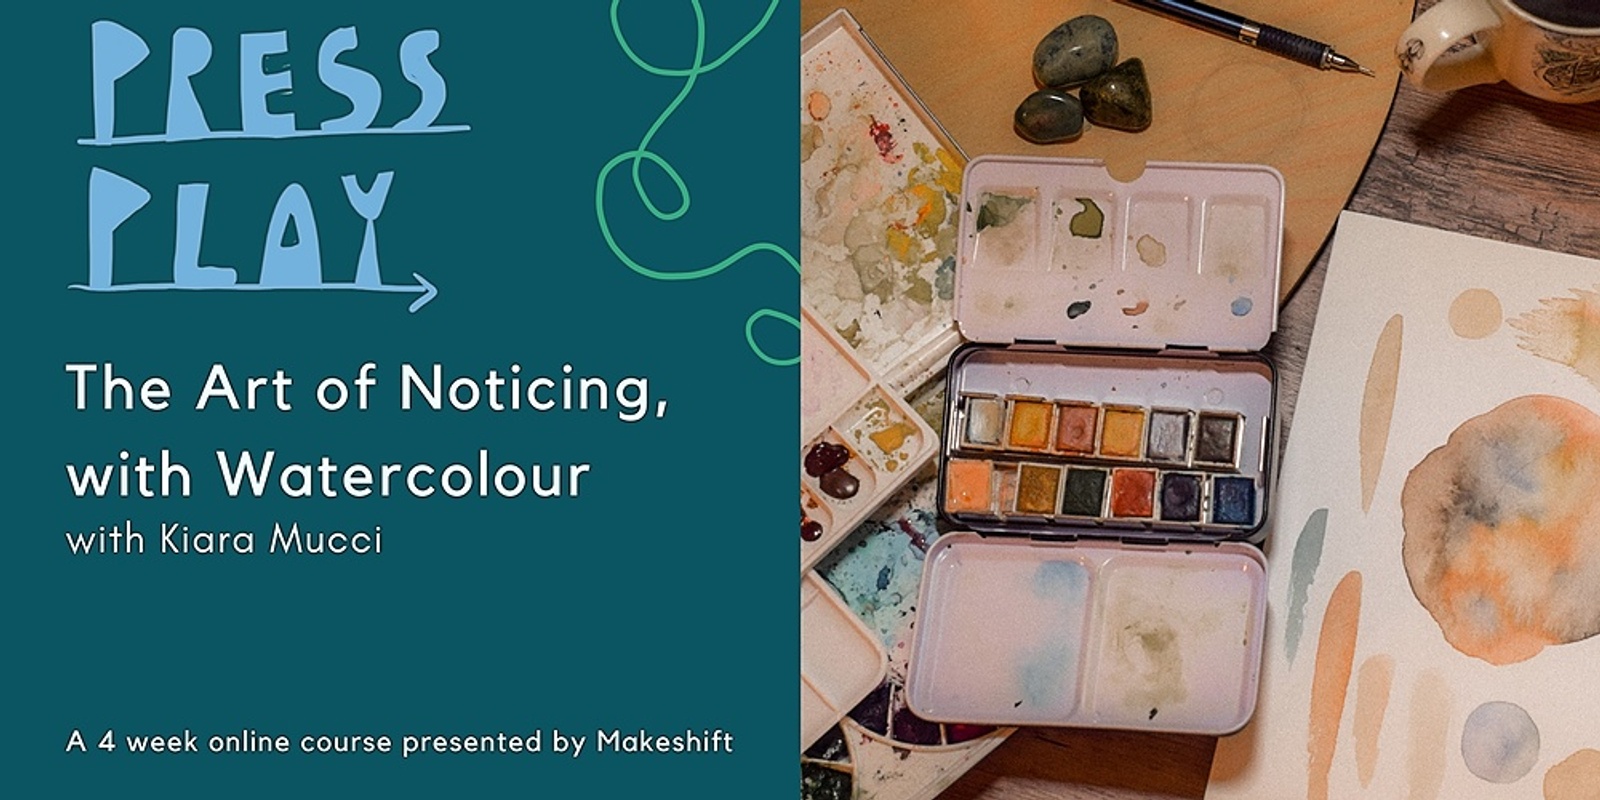 Banner image for Press Play: The Art of Noticing with Watercolour